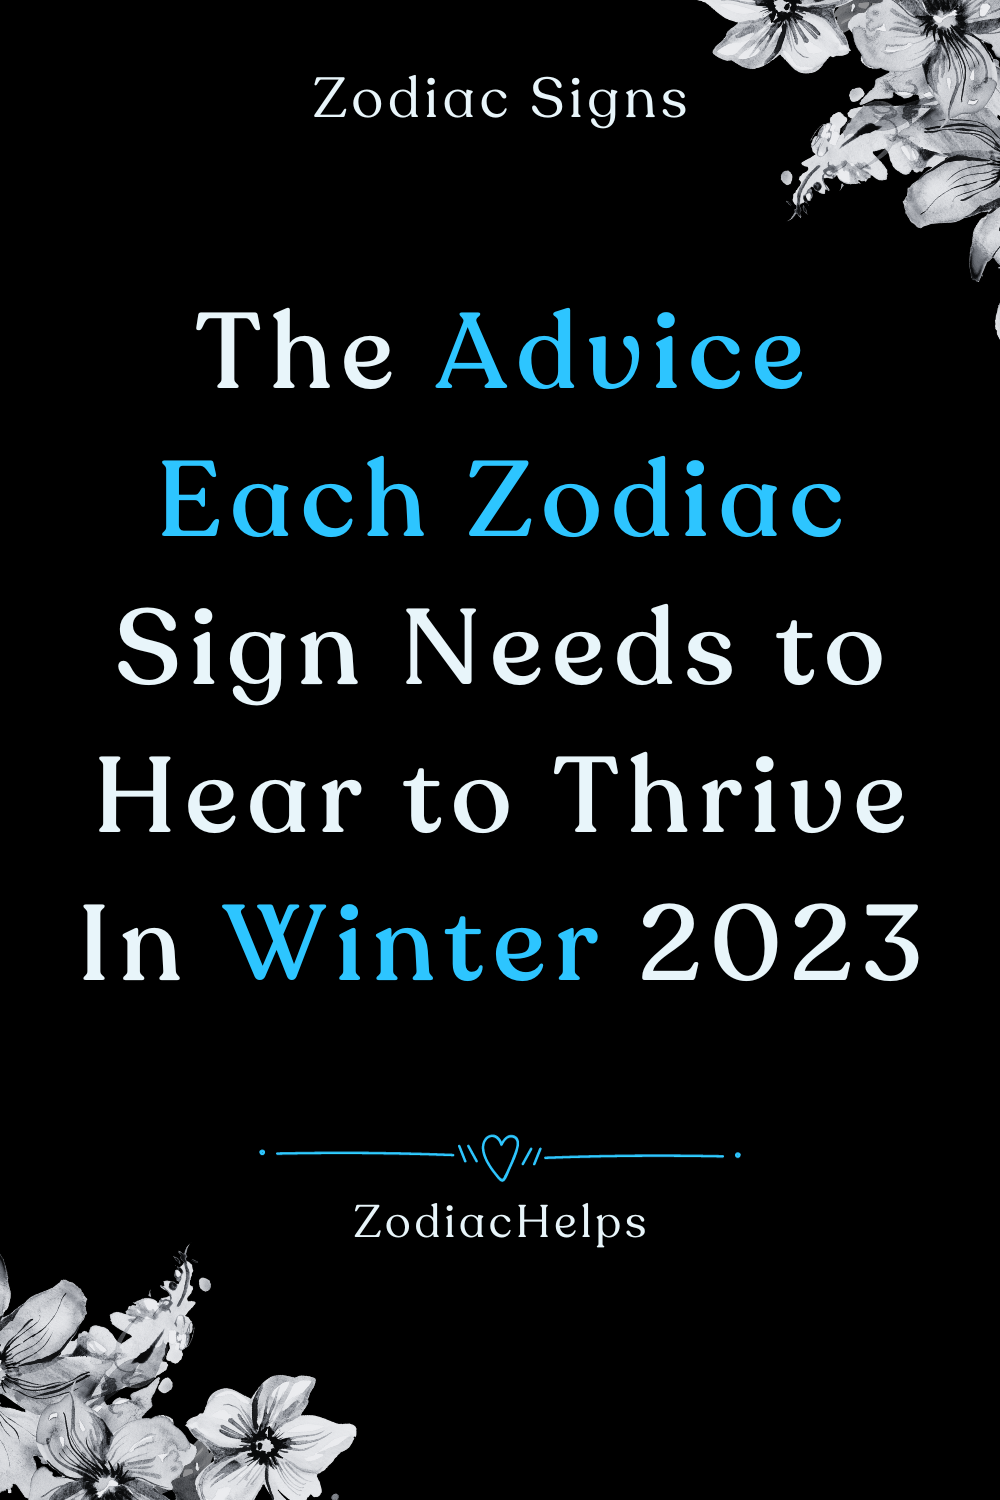 The Advice Each Zodiac Sign Needs to Hear to Thrive In Winter 2023